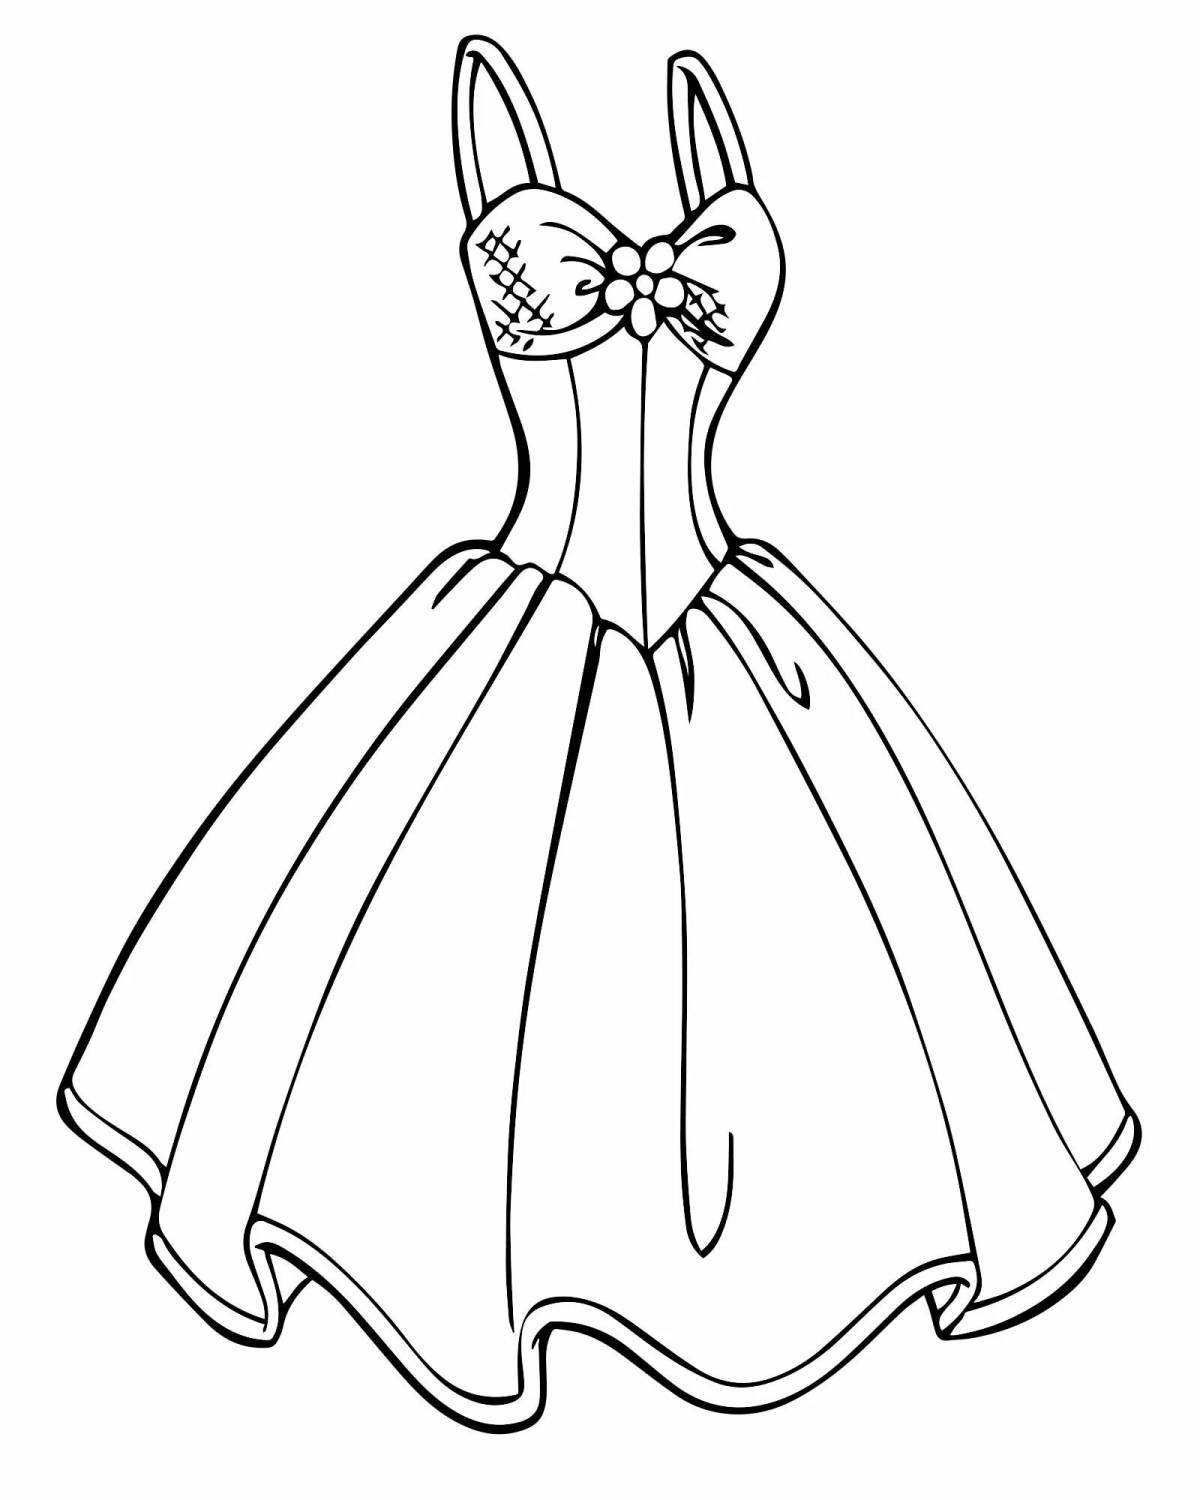 Coloring page with fun clothes and dress